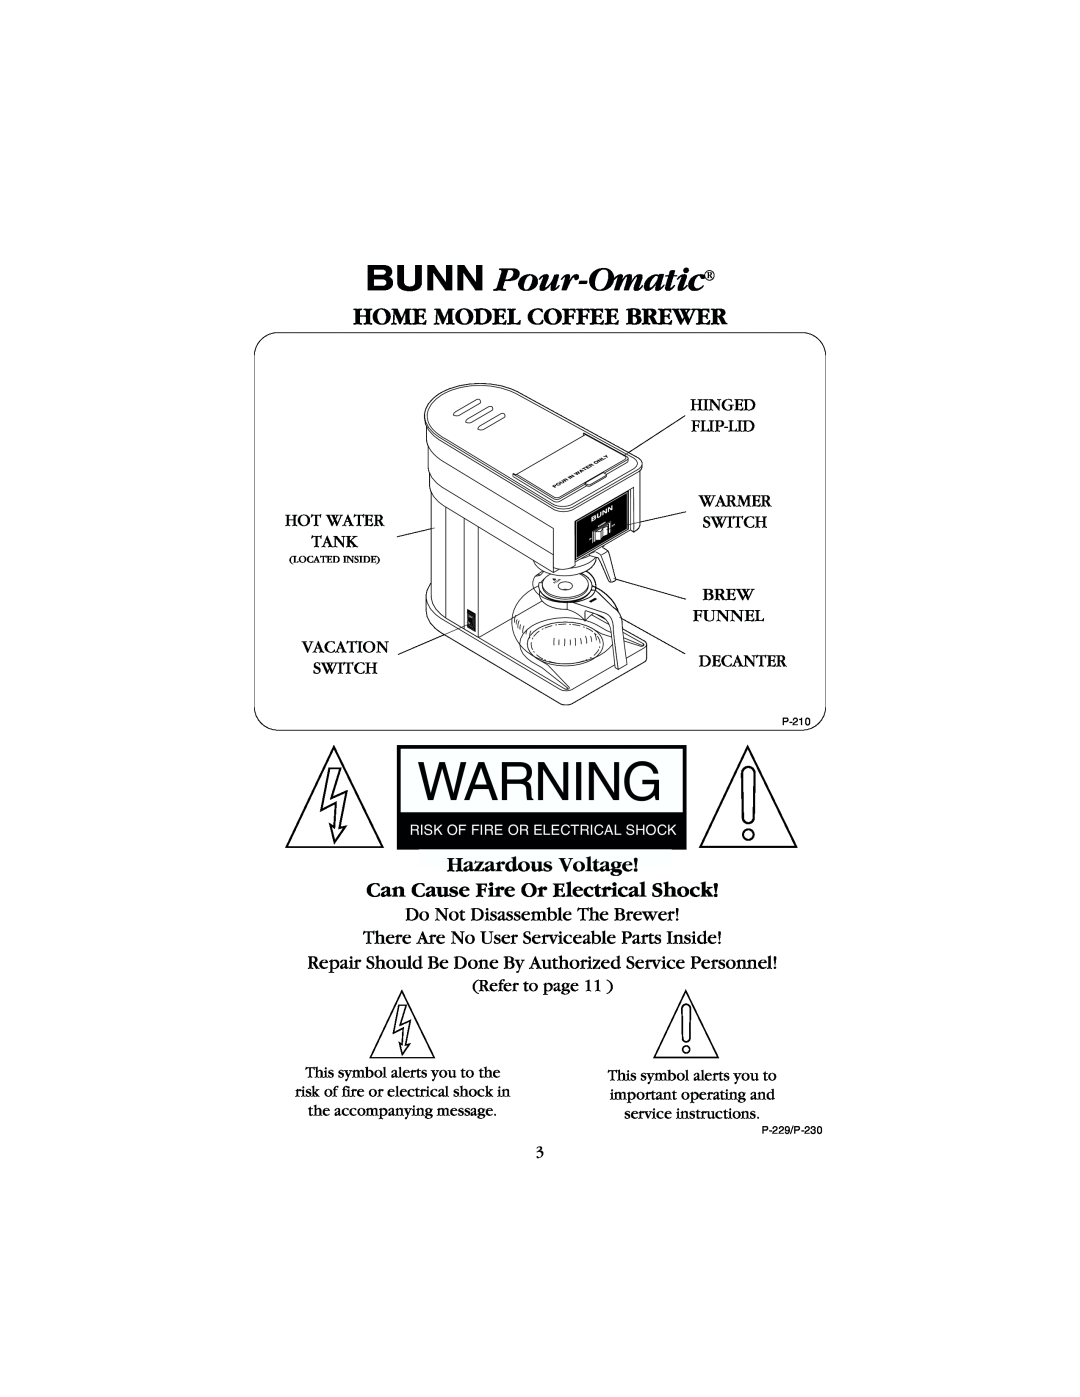 Bunn B8, GR manual BUNN Pour-Omatic, Home Model Coffee Brewer, Hazardous Voltage Can Cause Fire Or Electrical Shock 